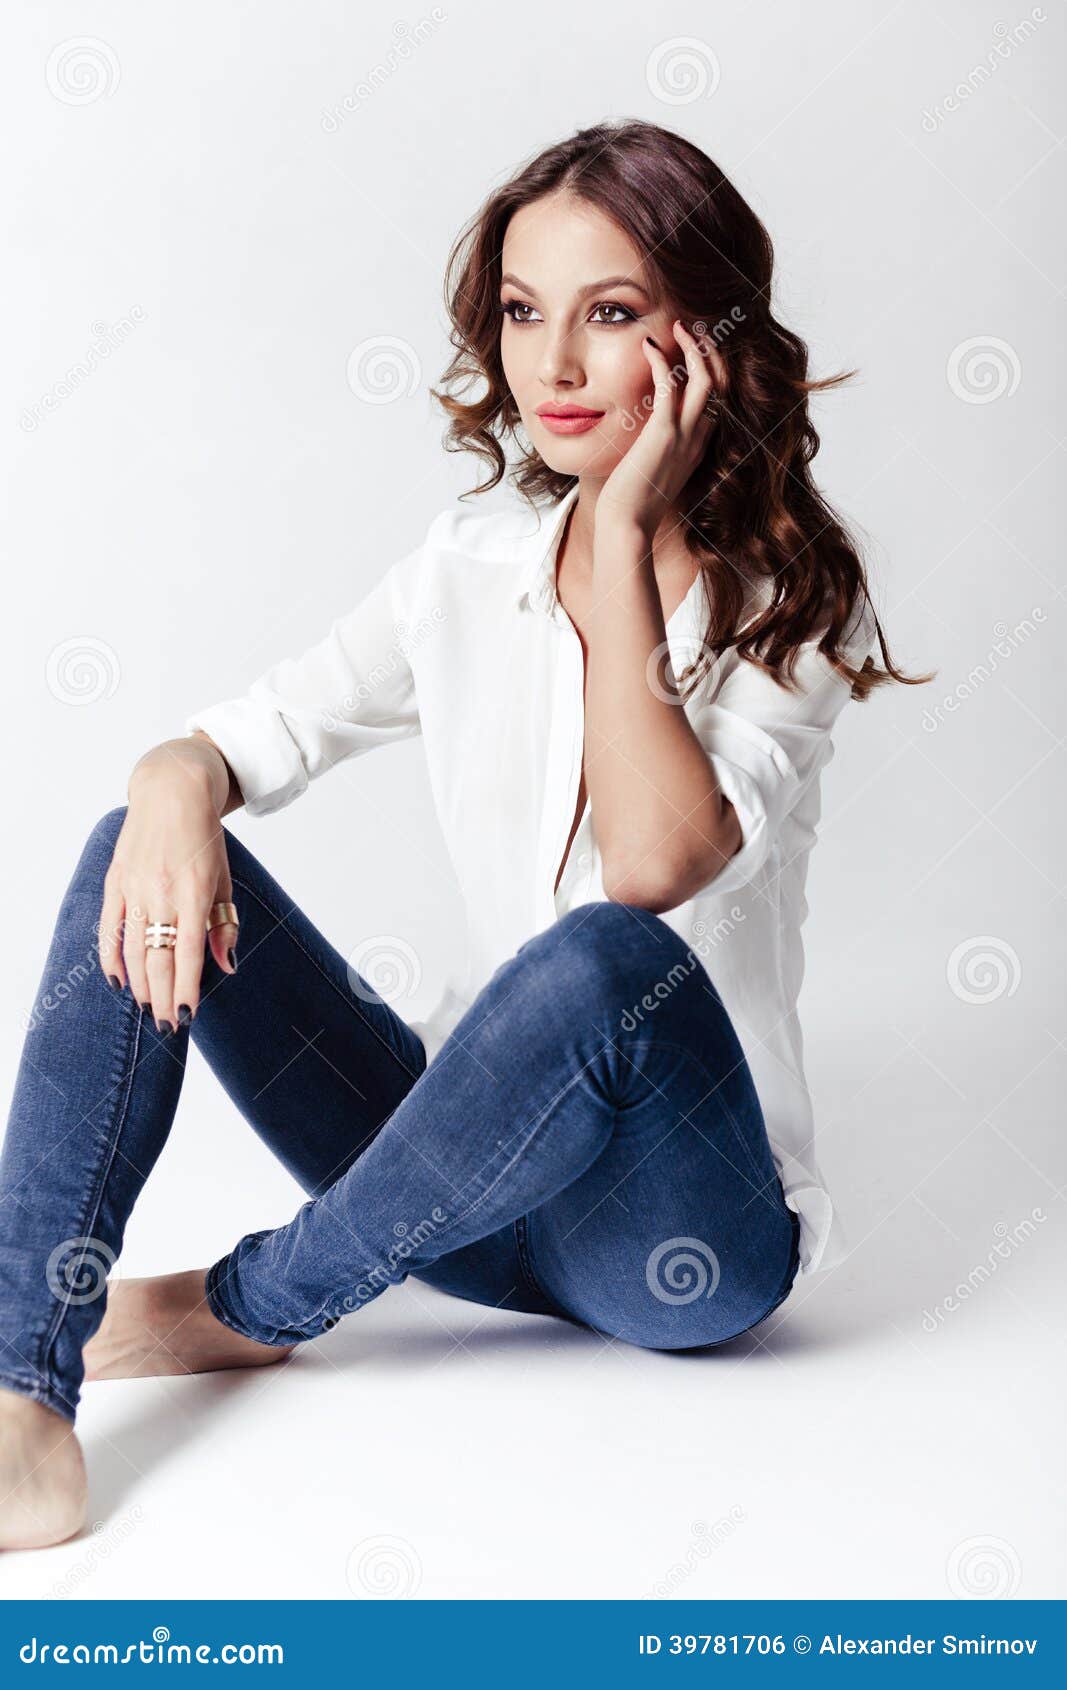 Fashion Model in a Blouse and Jeans Barefoot Stock Photo - Image of ...